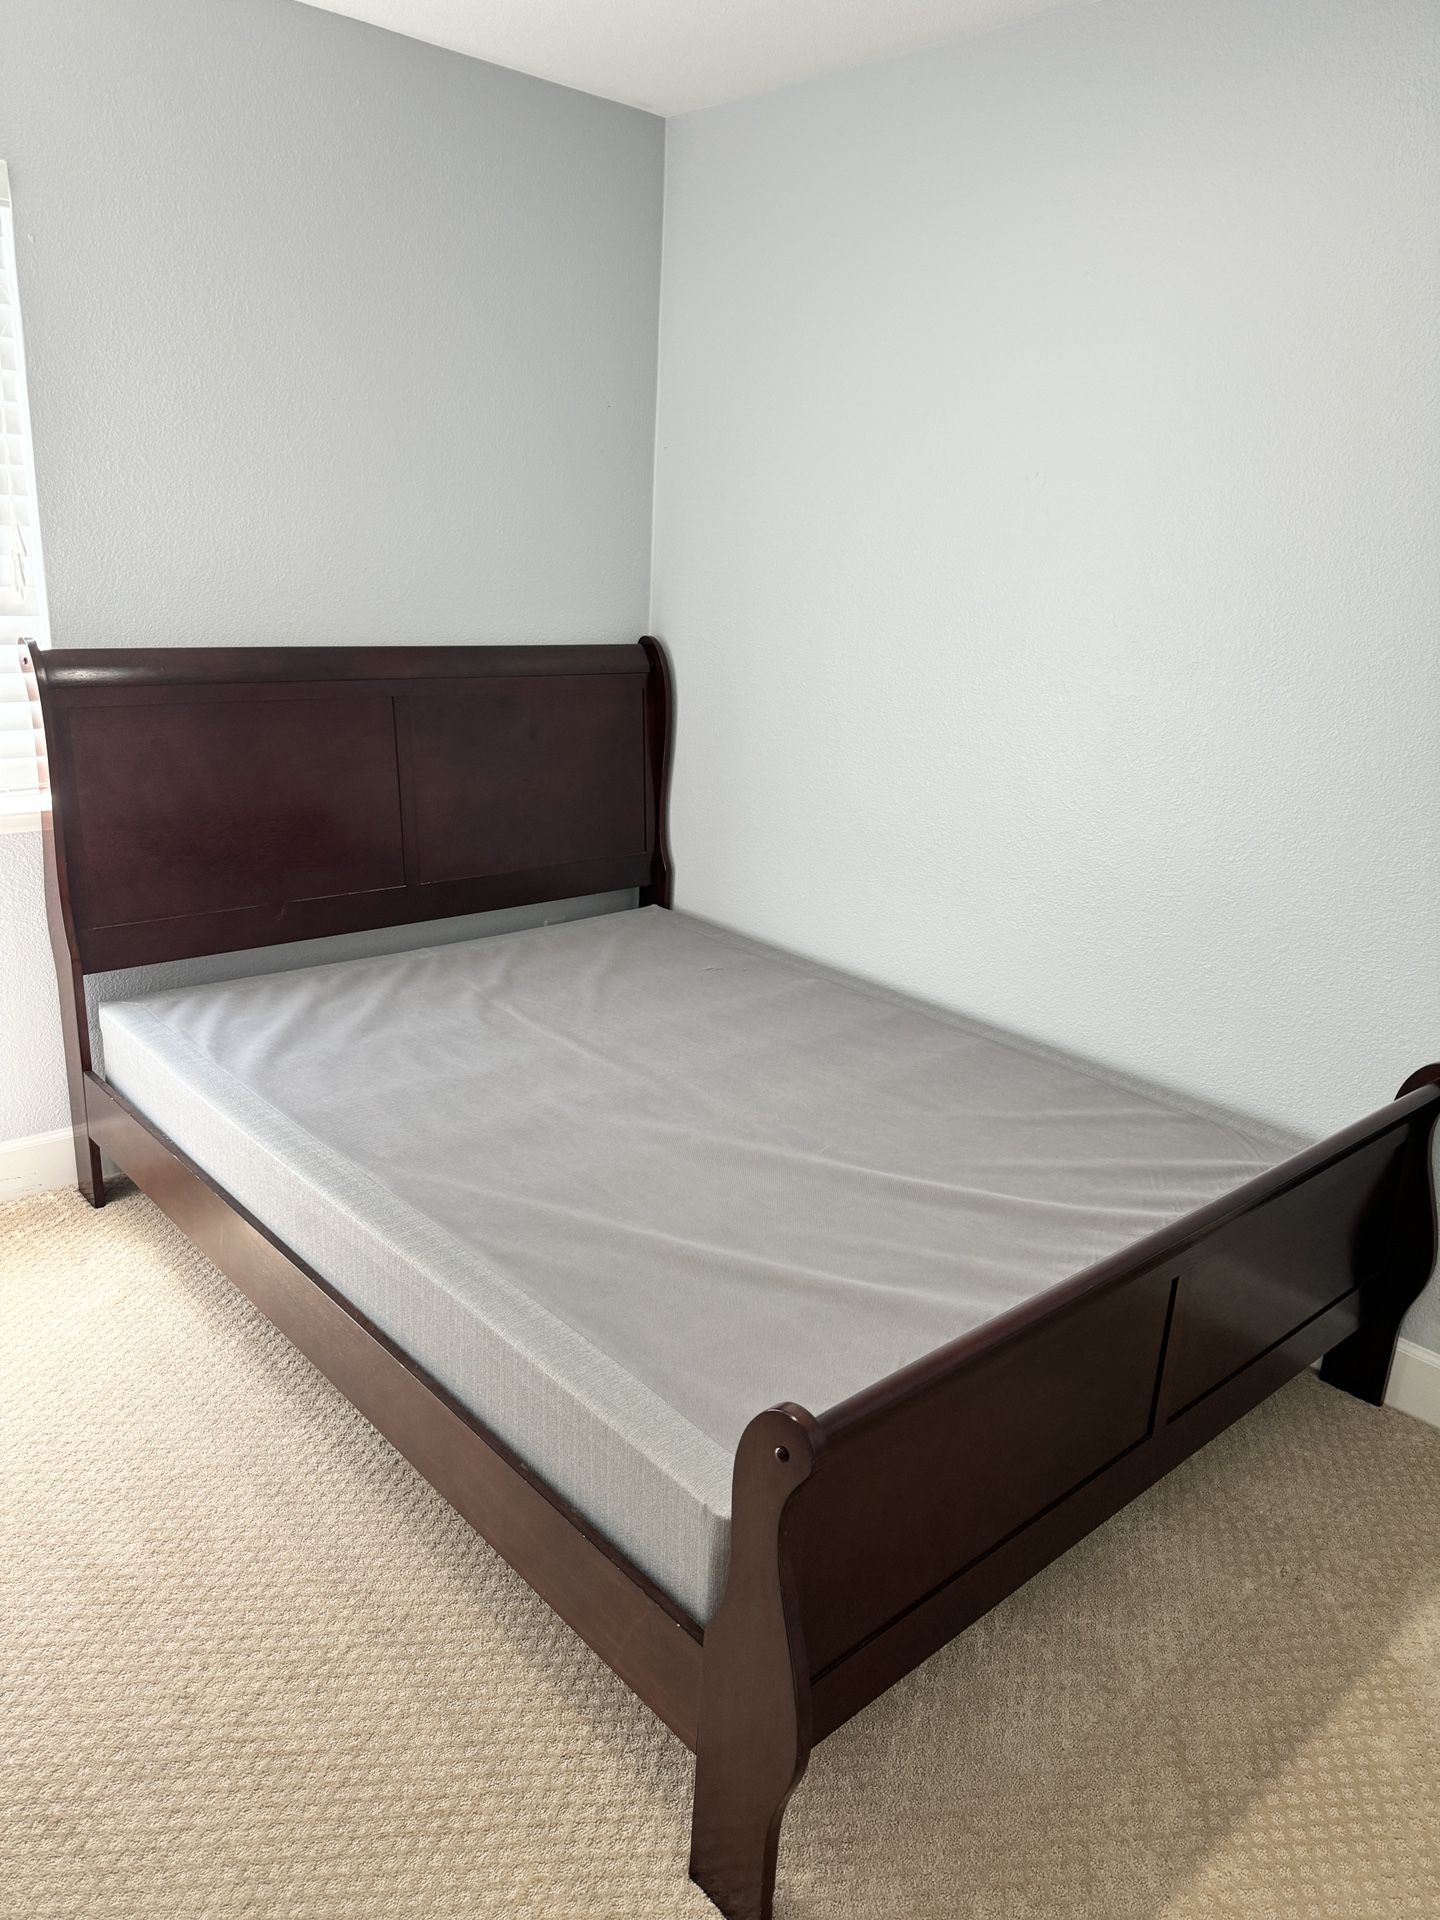 Queen Bed Frame With Box And night stand